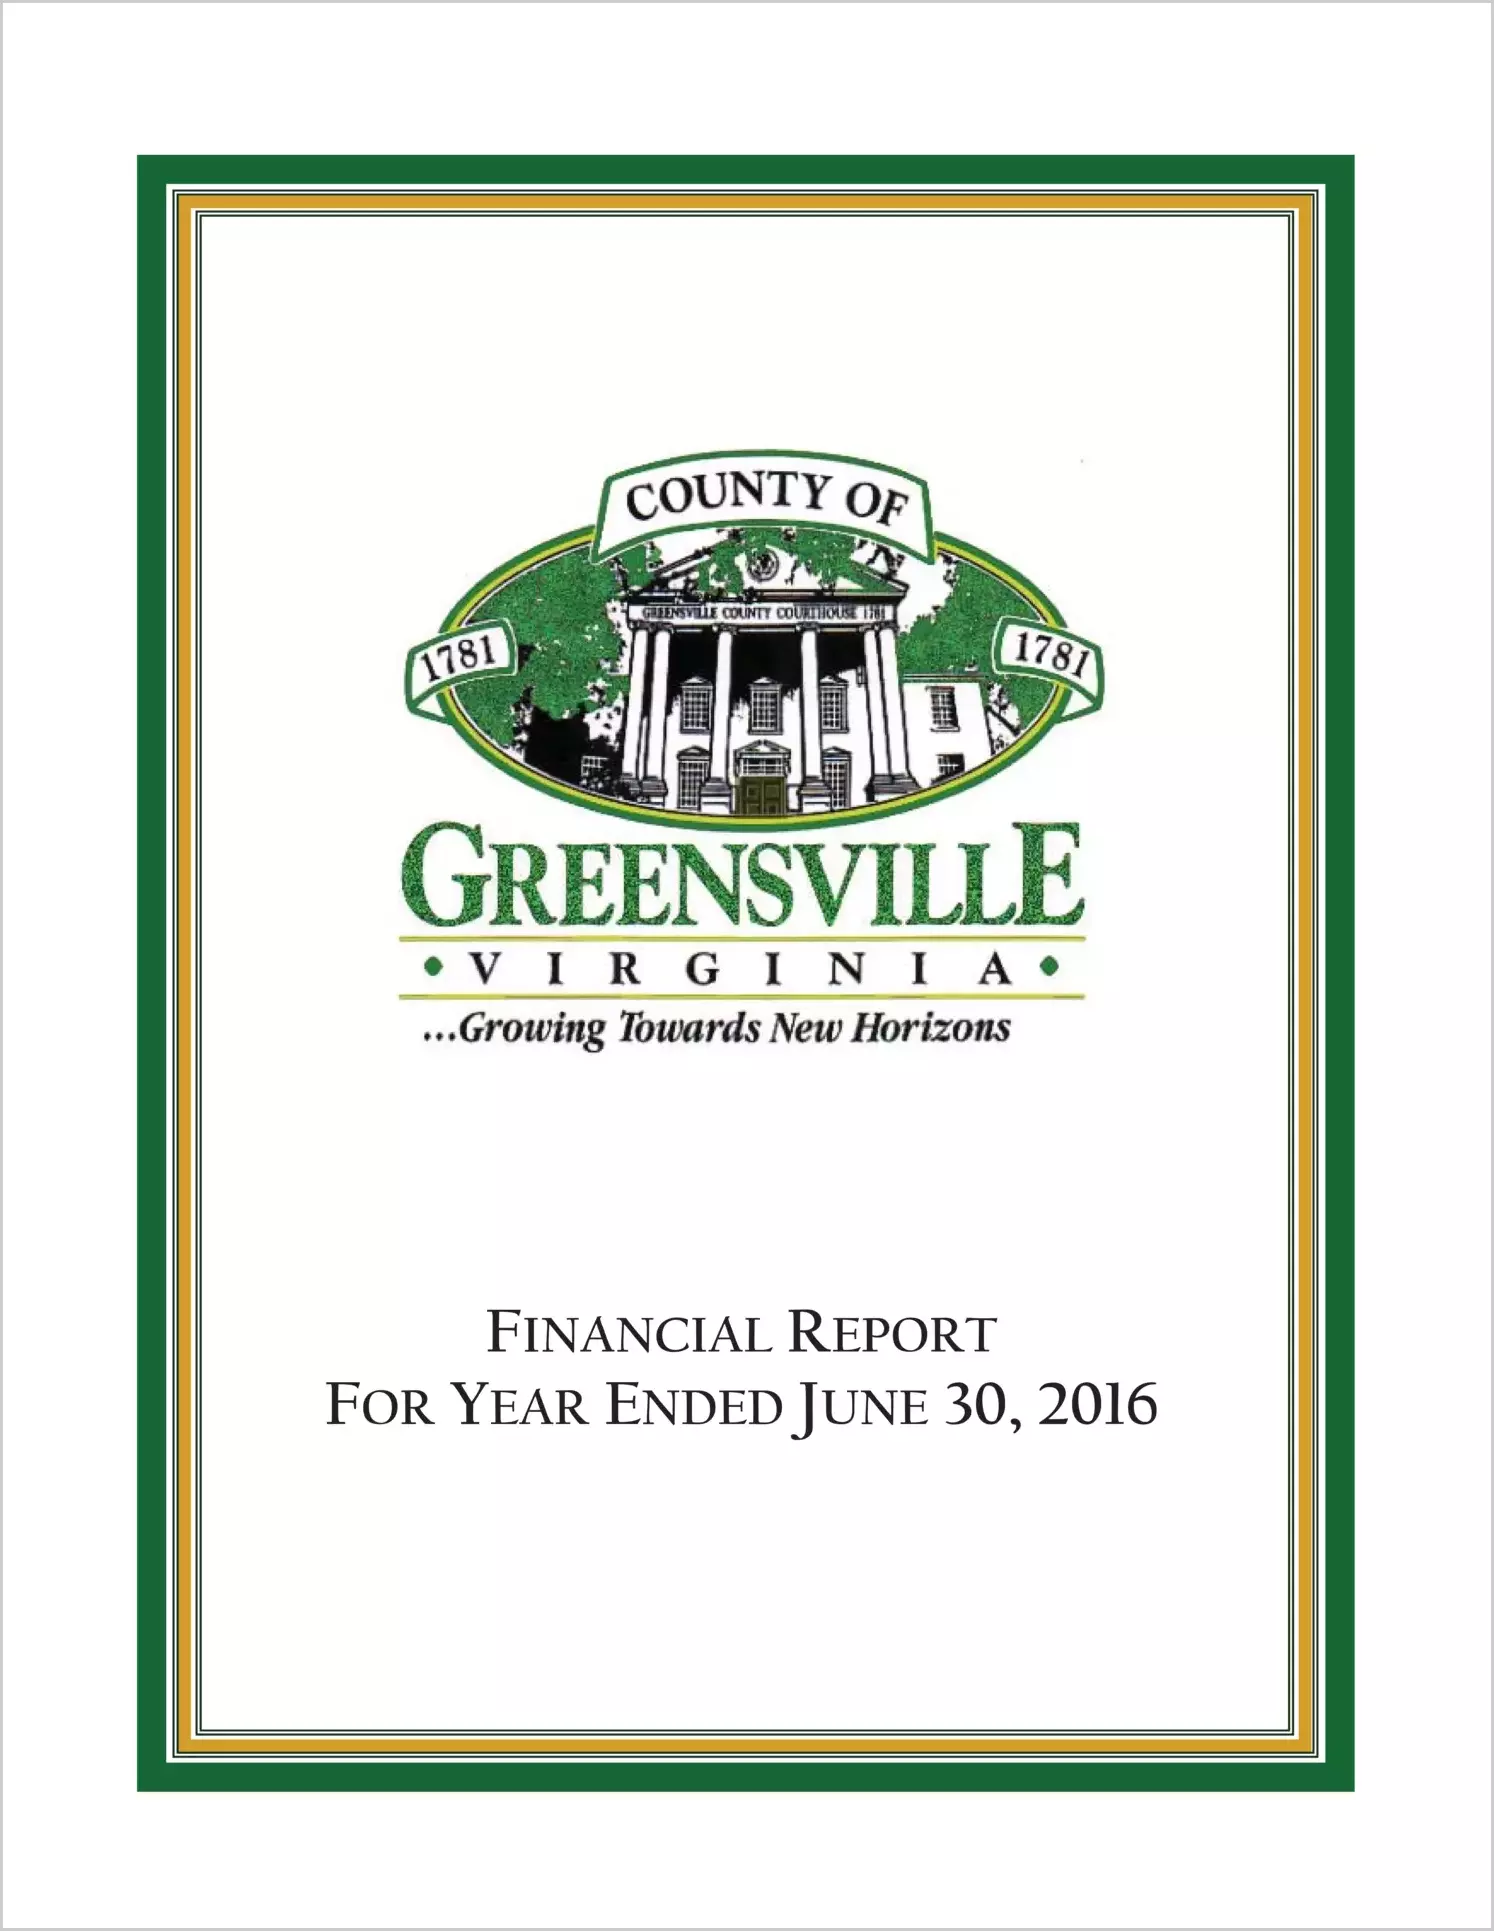 2016 Annual Financial Report for County of Greensville